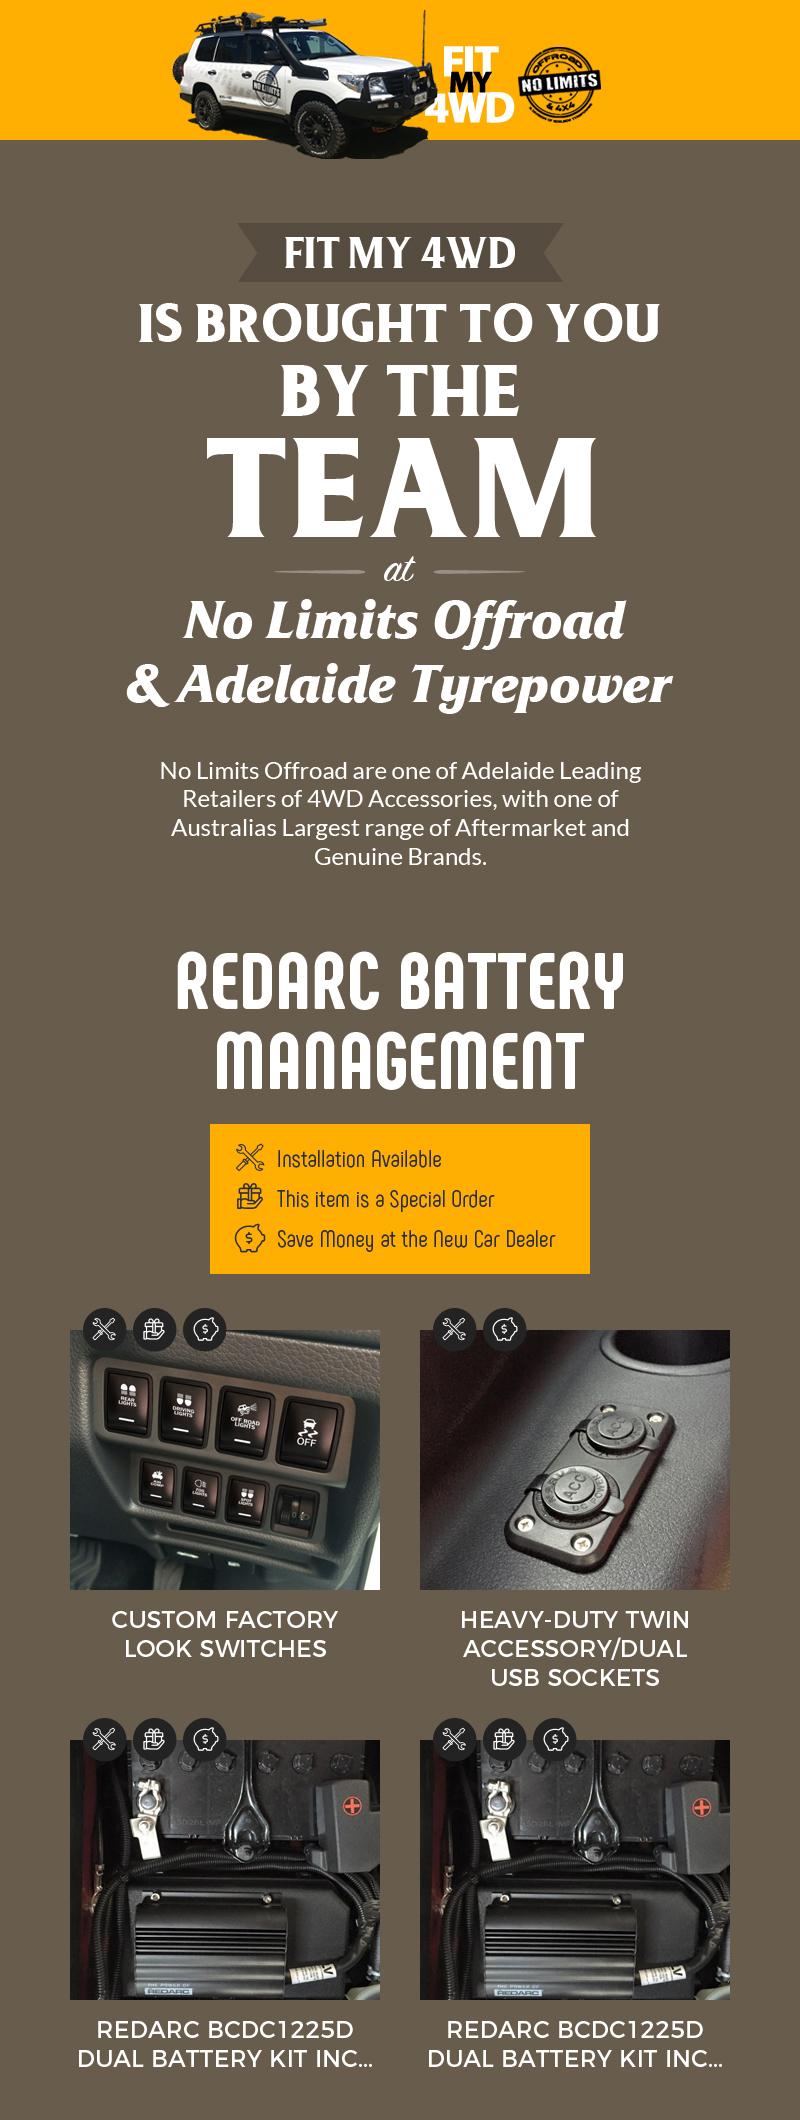 Shop Fit My 4wd to Buy Online Redarc Battery Management Systems